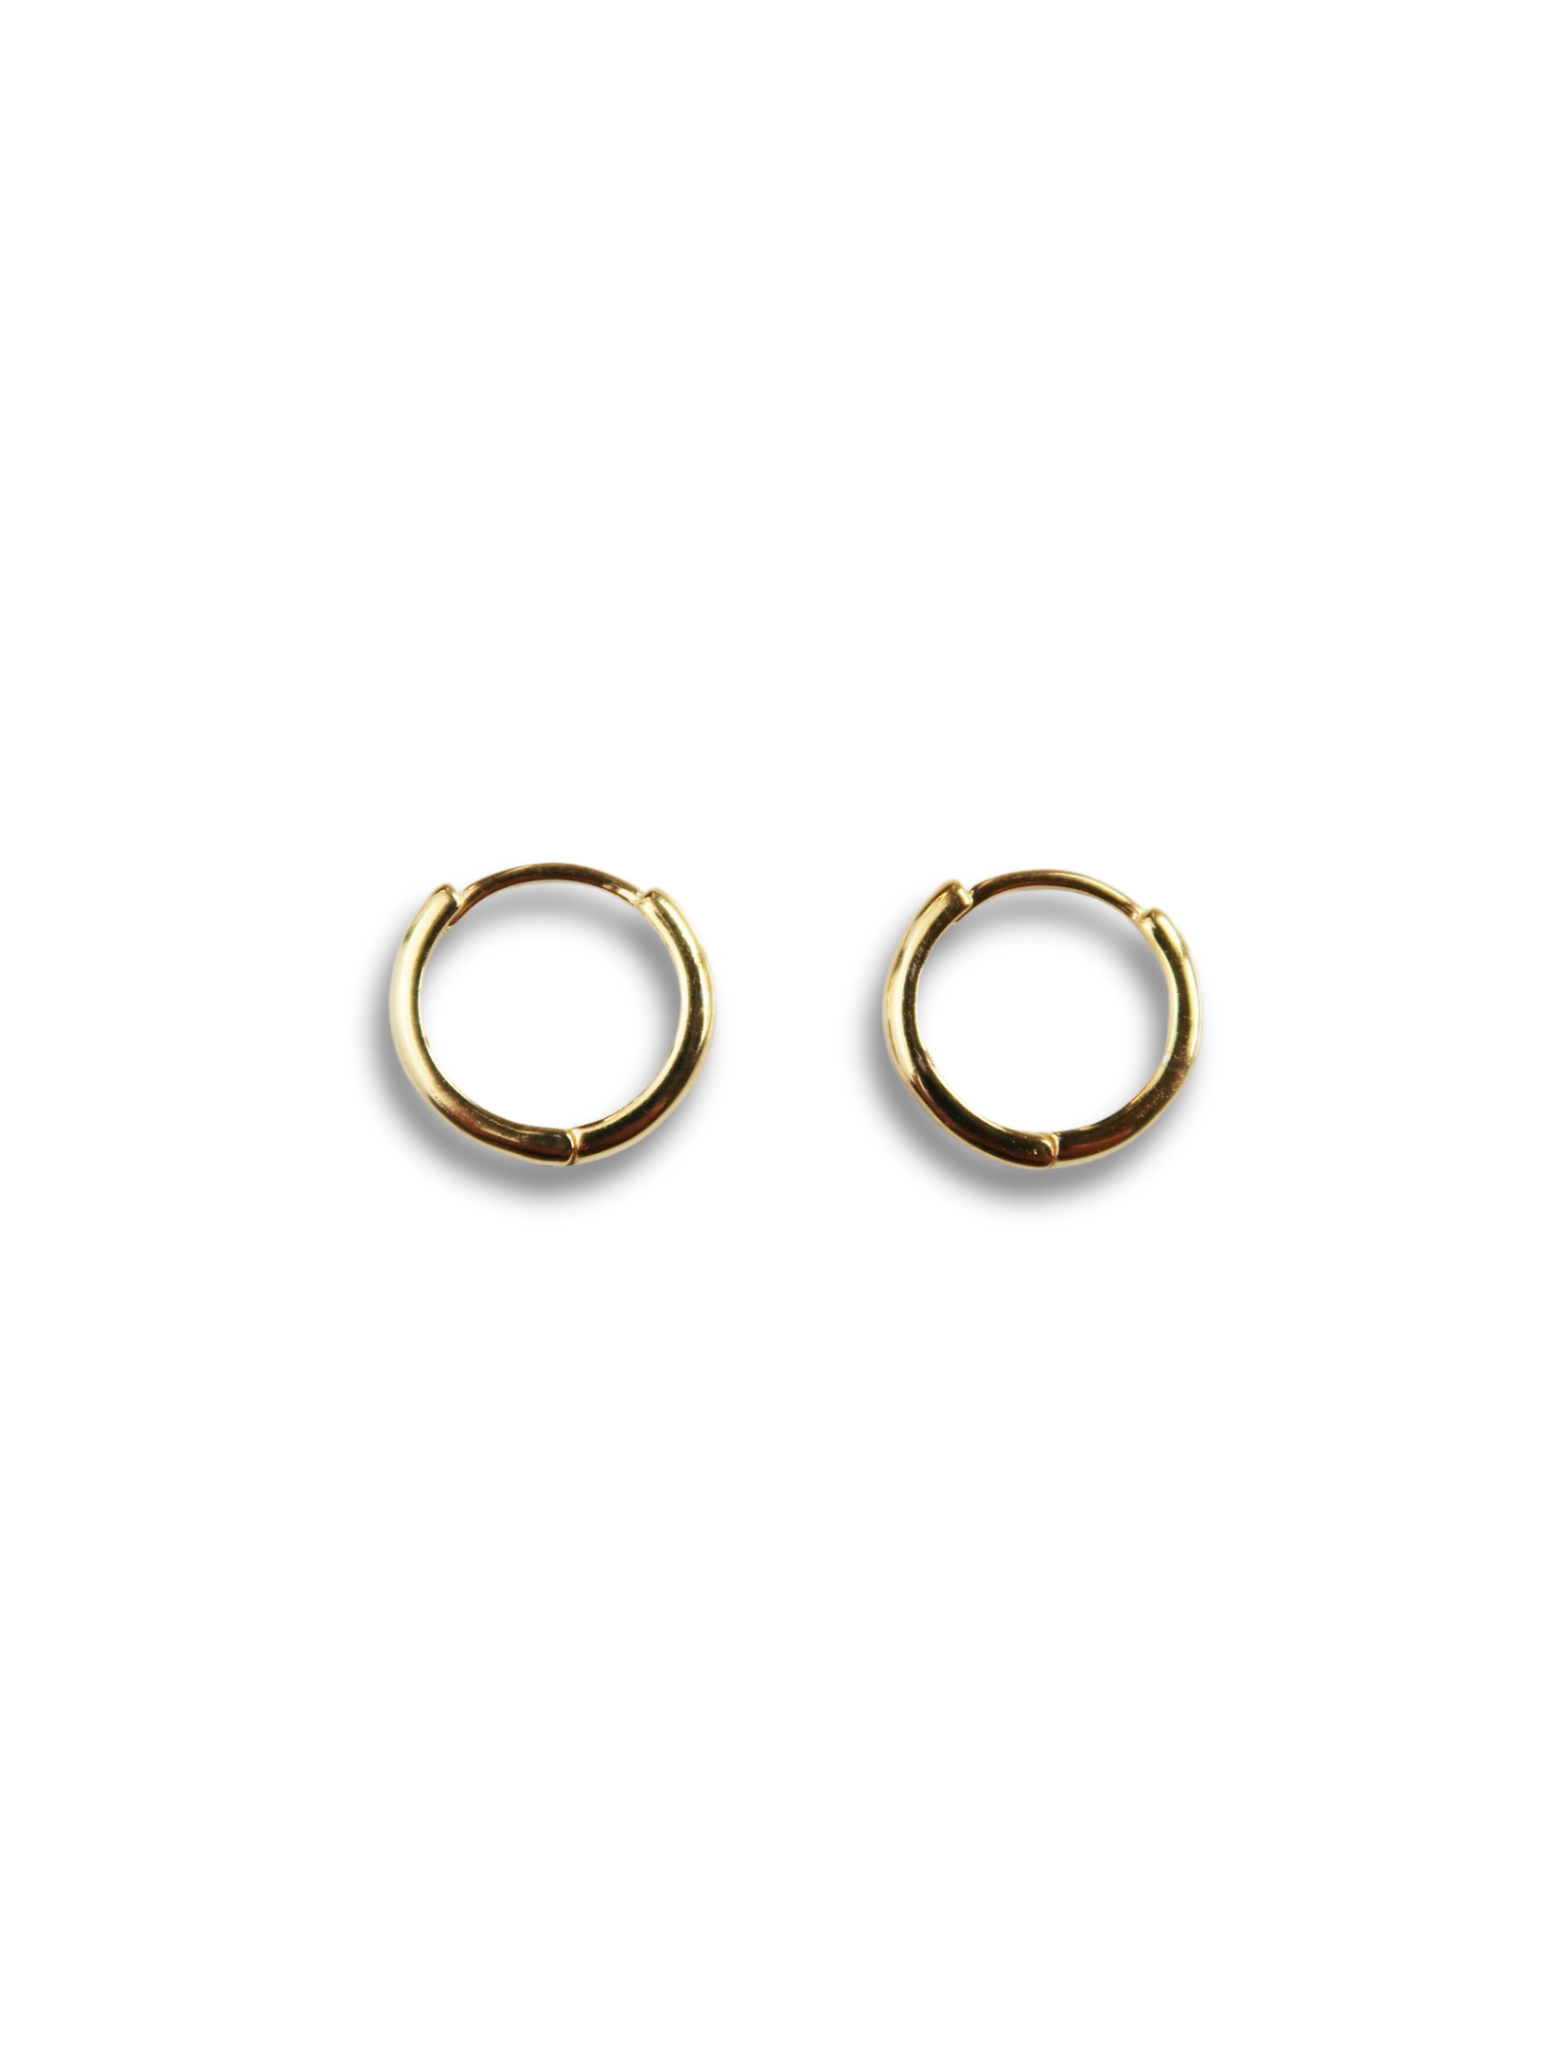 Golden Sterling Silver Hoops - Esah and Co